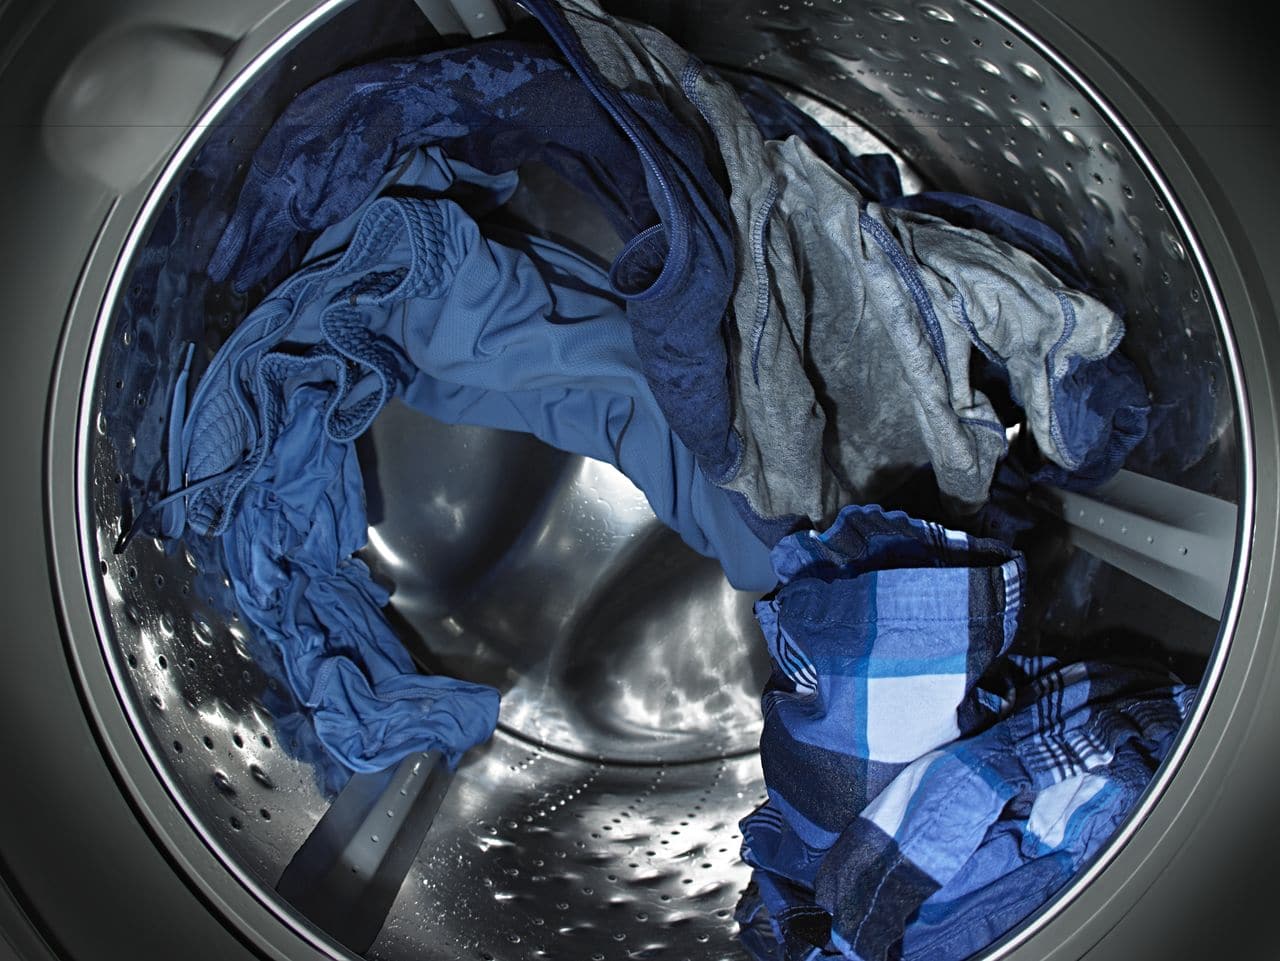 Featured image for “Washing Machine Leaving Residue on Clothing”